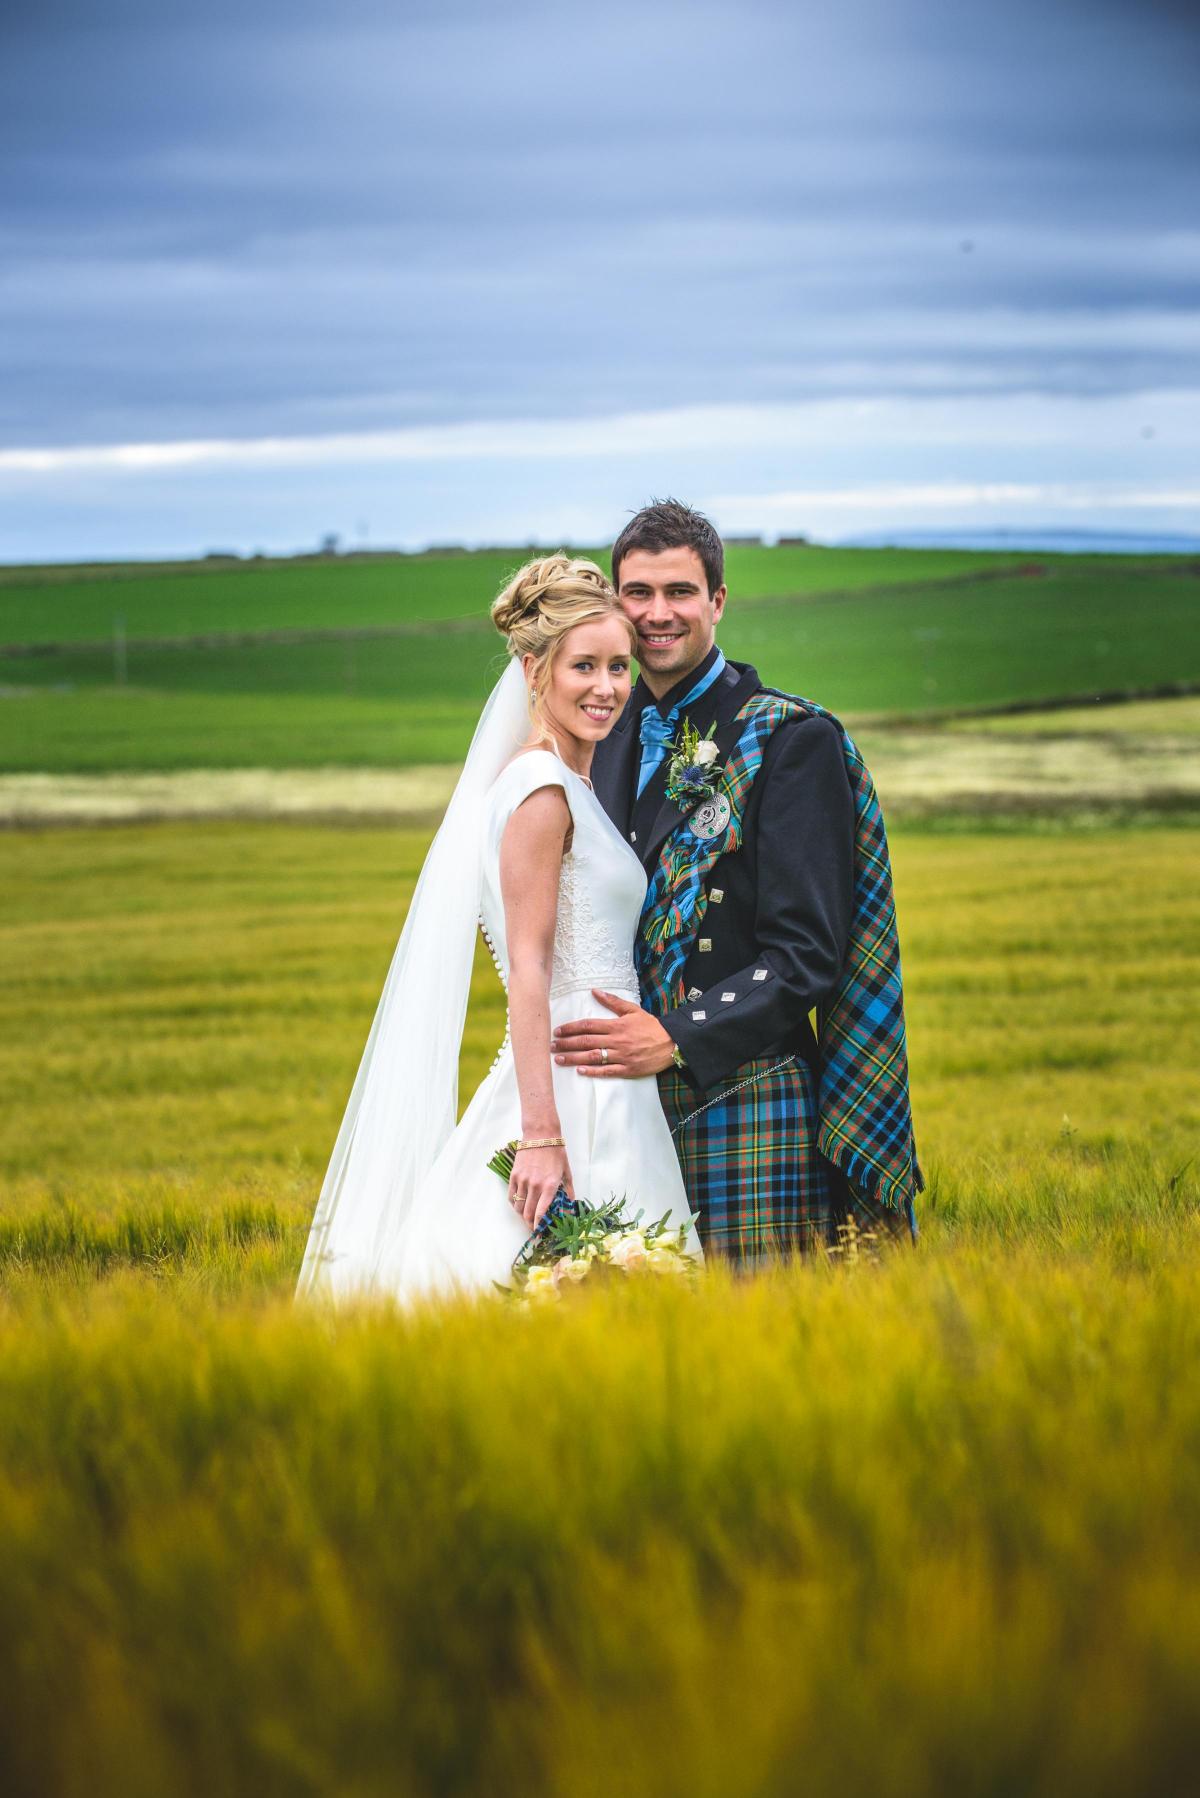 Claire Foubister, Netherton Farm, Holm, Orkney, married Michael MacLellan, from Inverness, at St Magnus Cathedral, Kirkwall